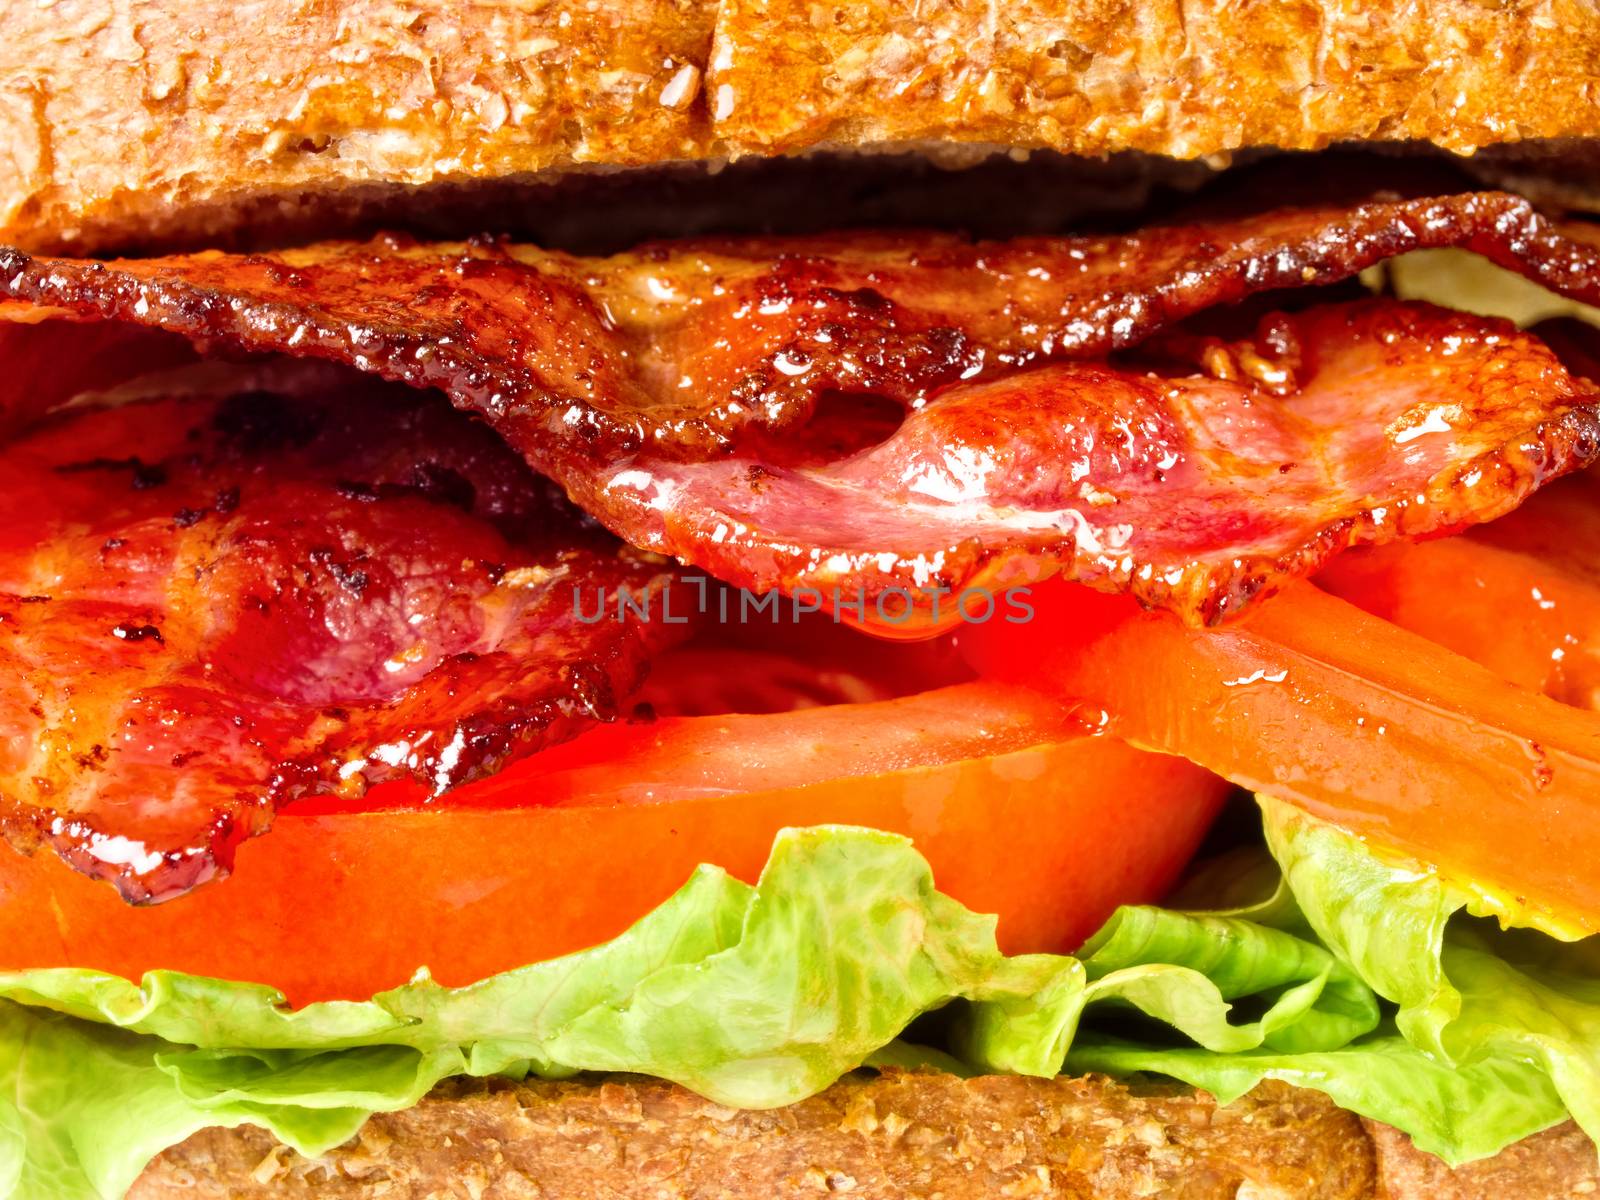 juicy bacon lettuce and tomato sandwich by zkruger